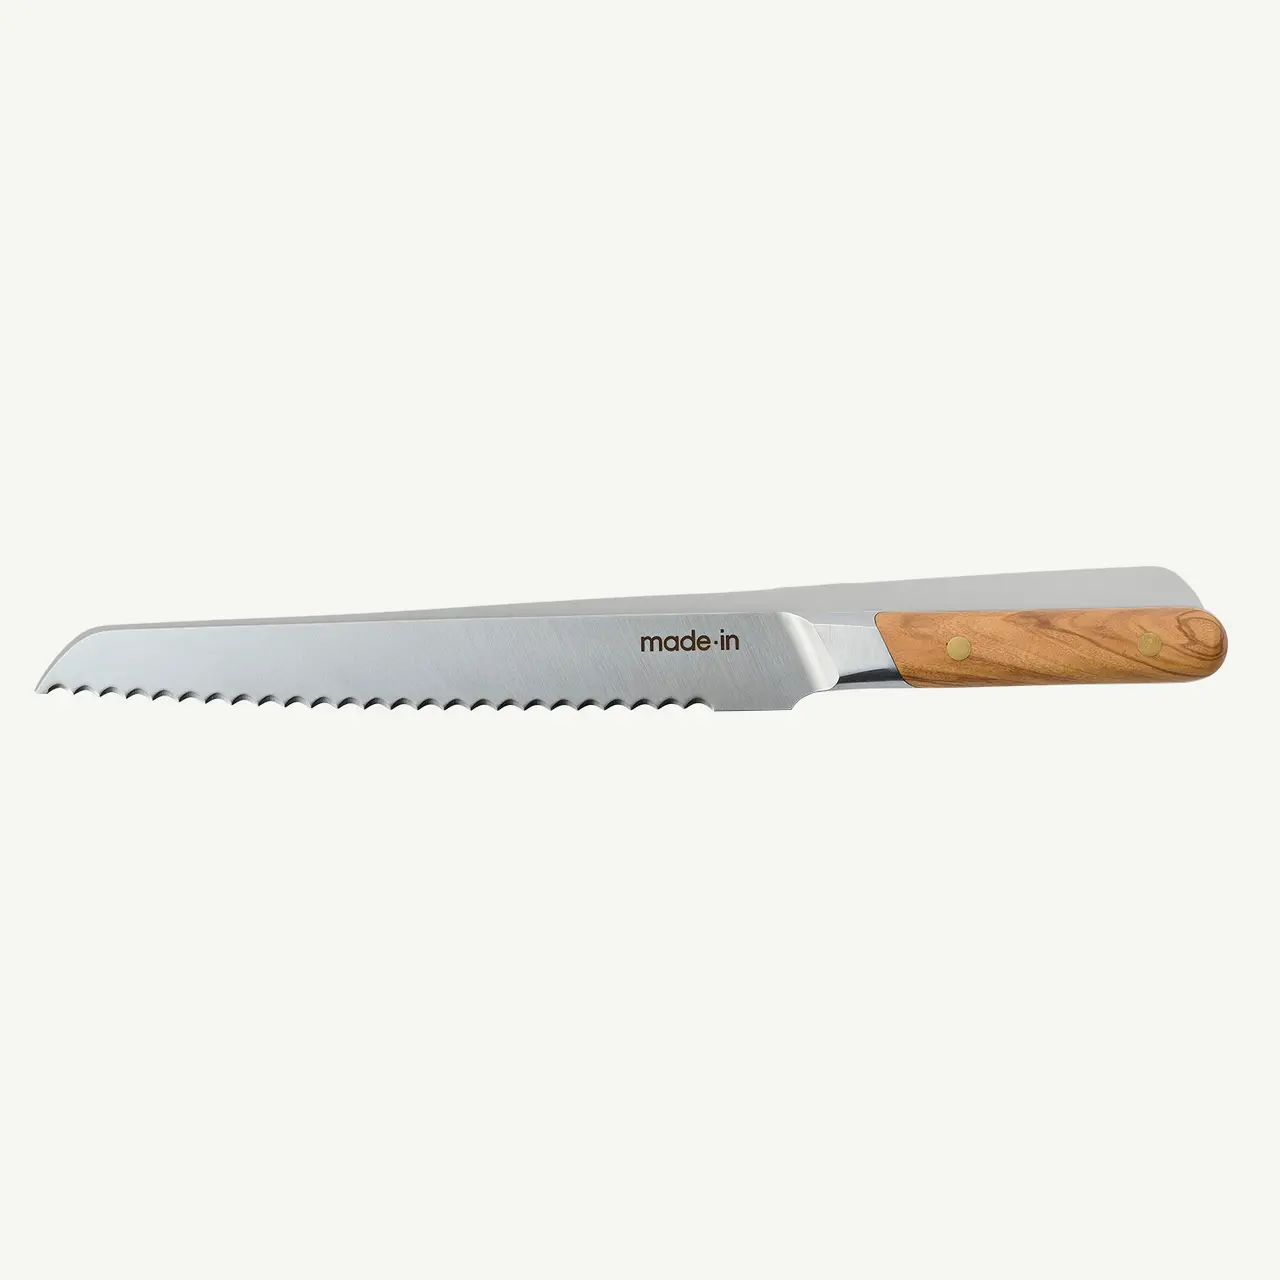 A serrated bread knife with a stainless steel blade and wooden handle isolated on a white background.